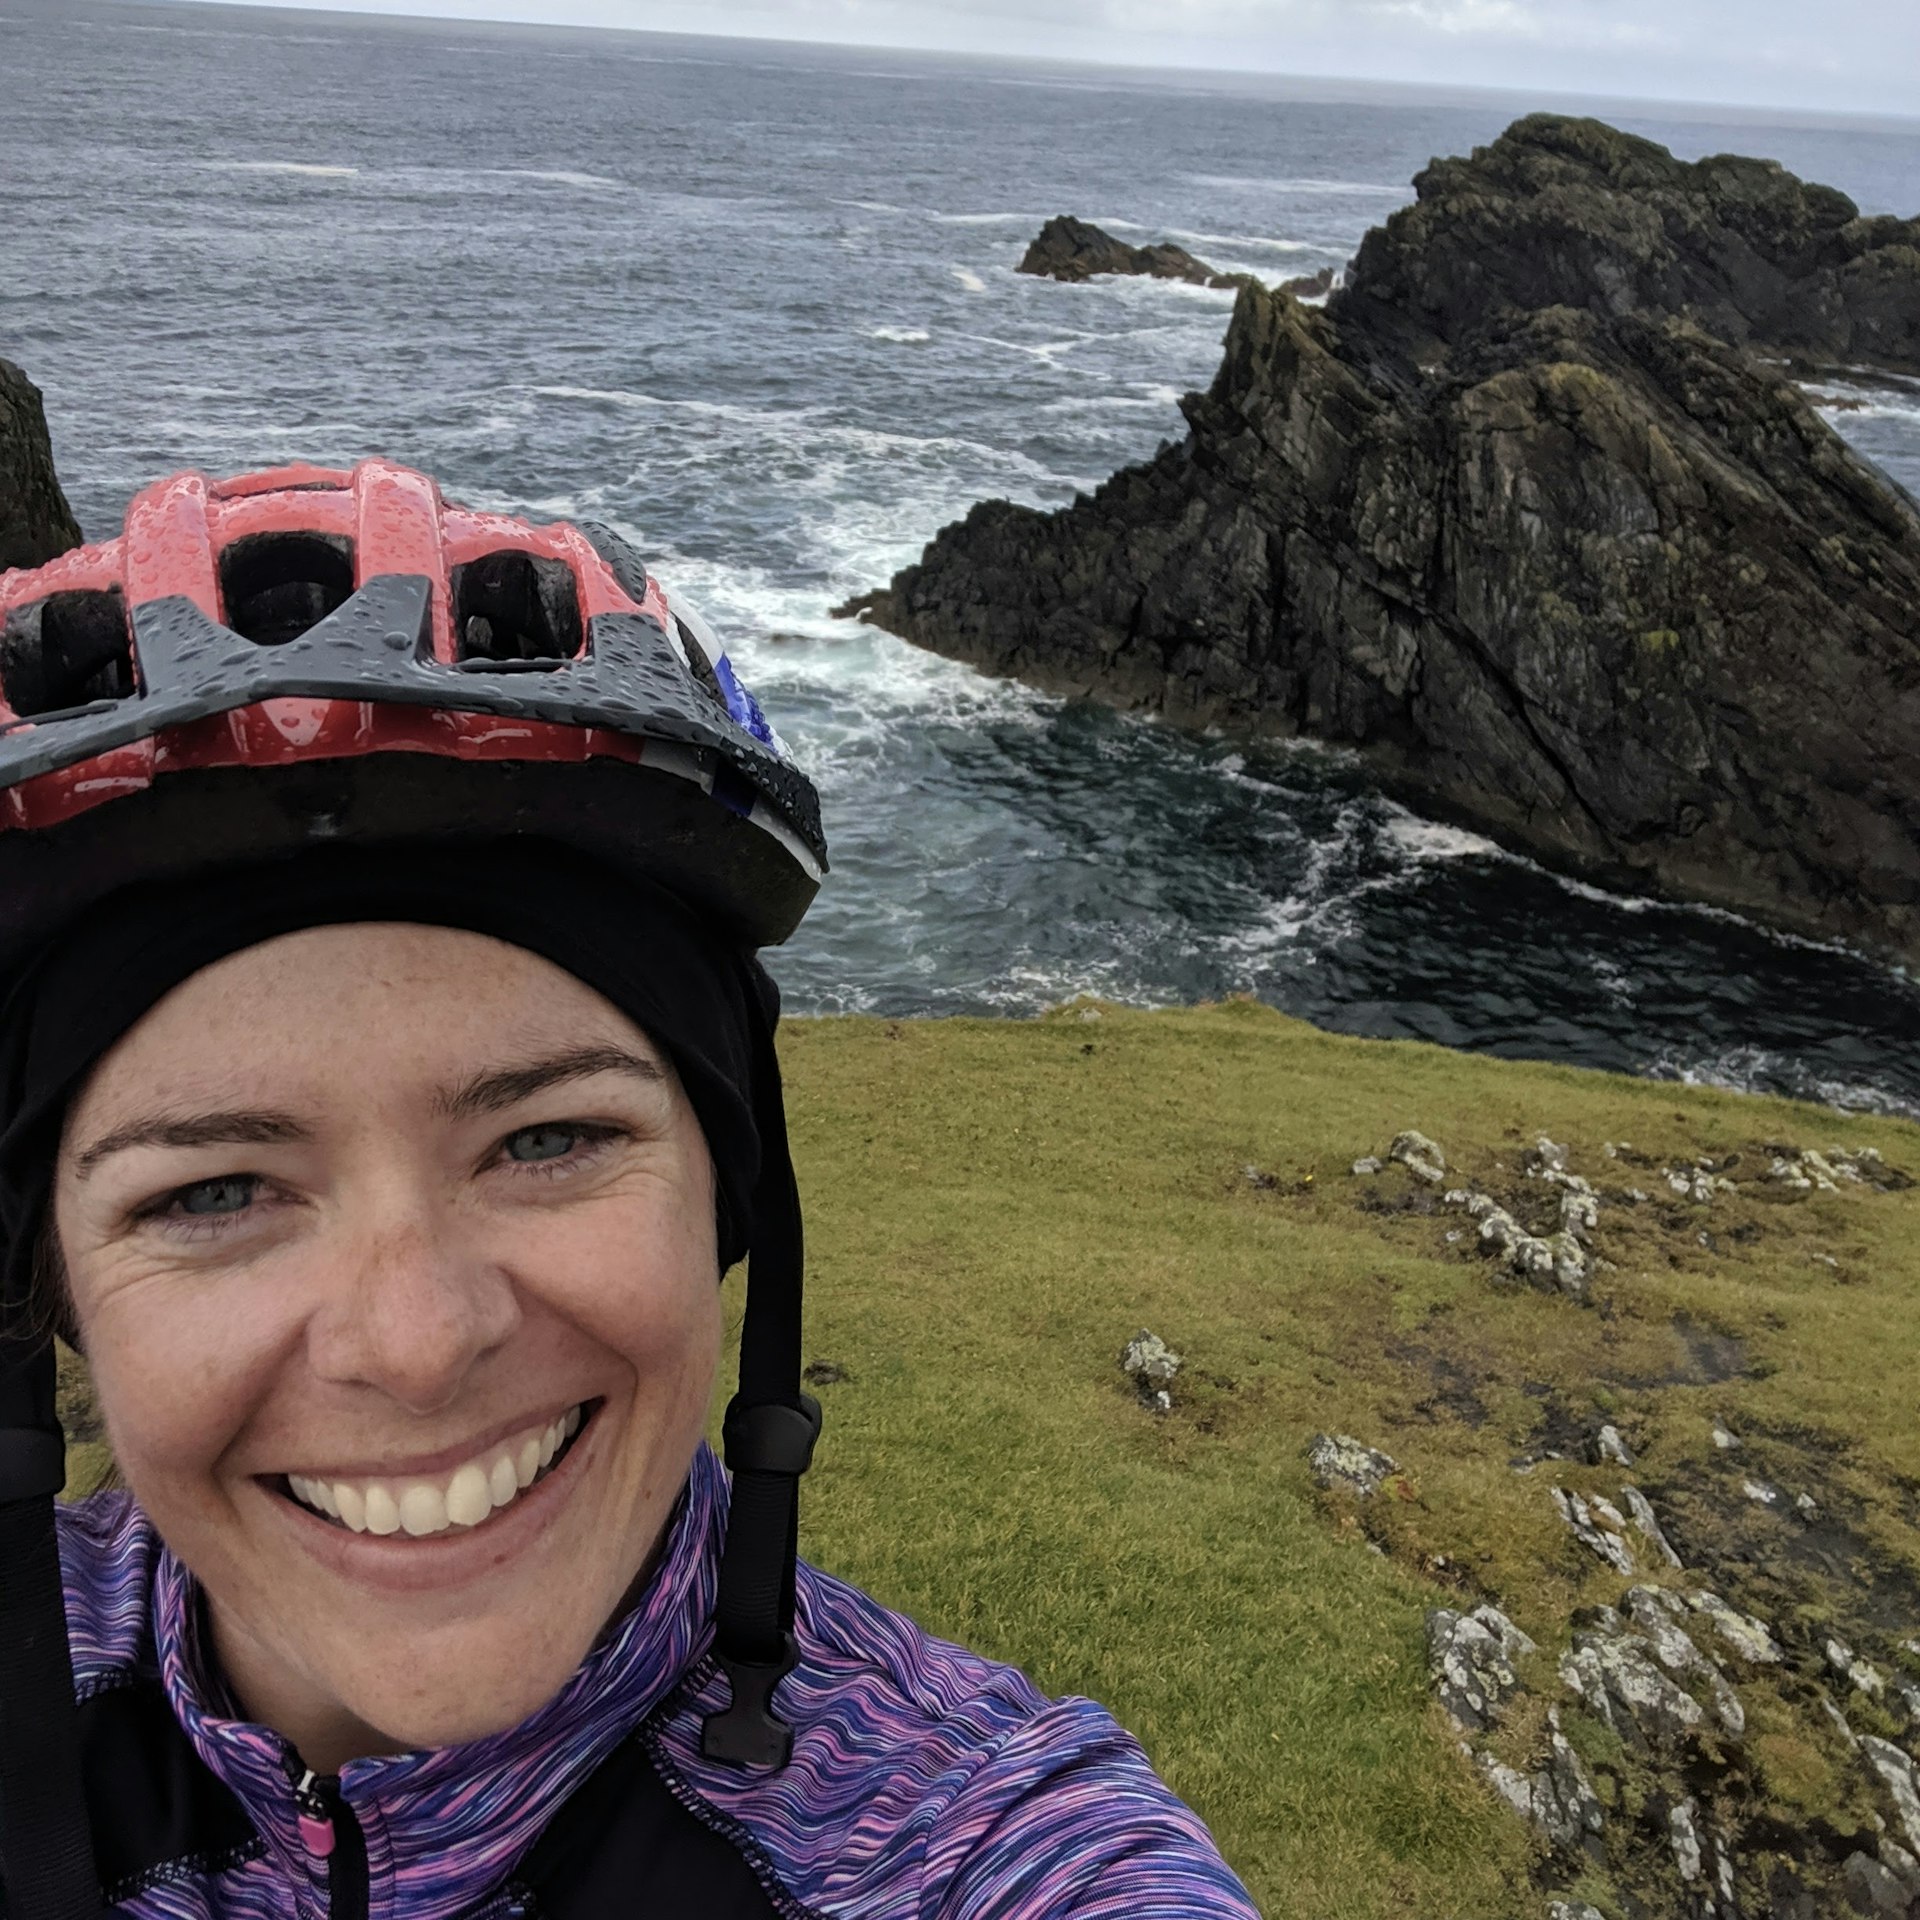 Amy Lynch smiling at the camera with the craggy coastline of the Outer Hebrides, Scotland in the background